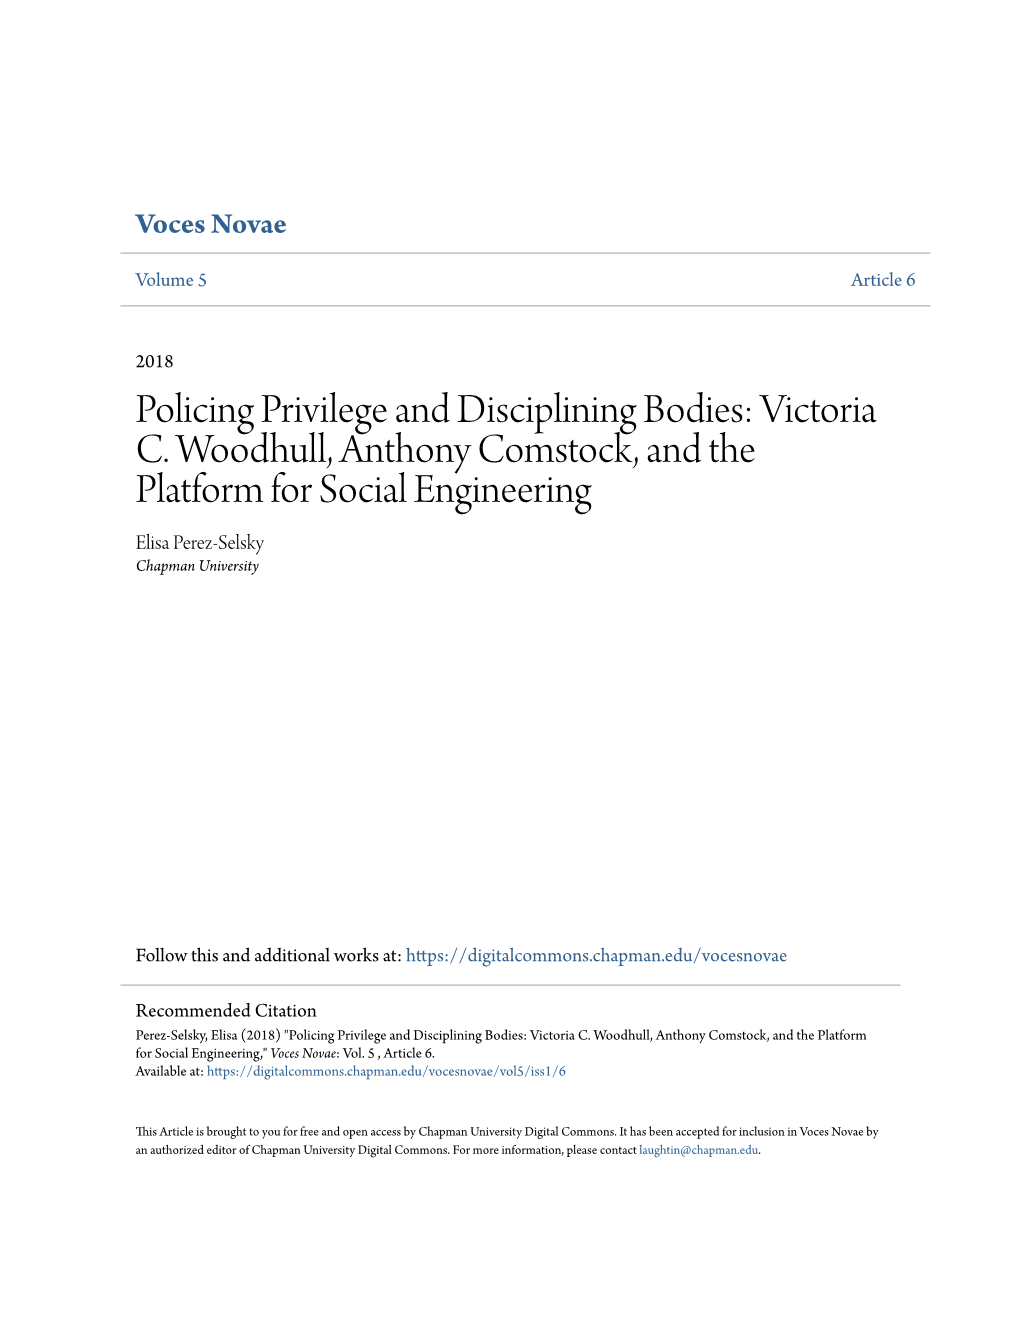 Victoria C. Woodhull, Anthony Comstock, and the Platform for Social Engineering Elisa Perez-Selsky Chapman University